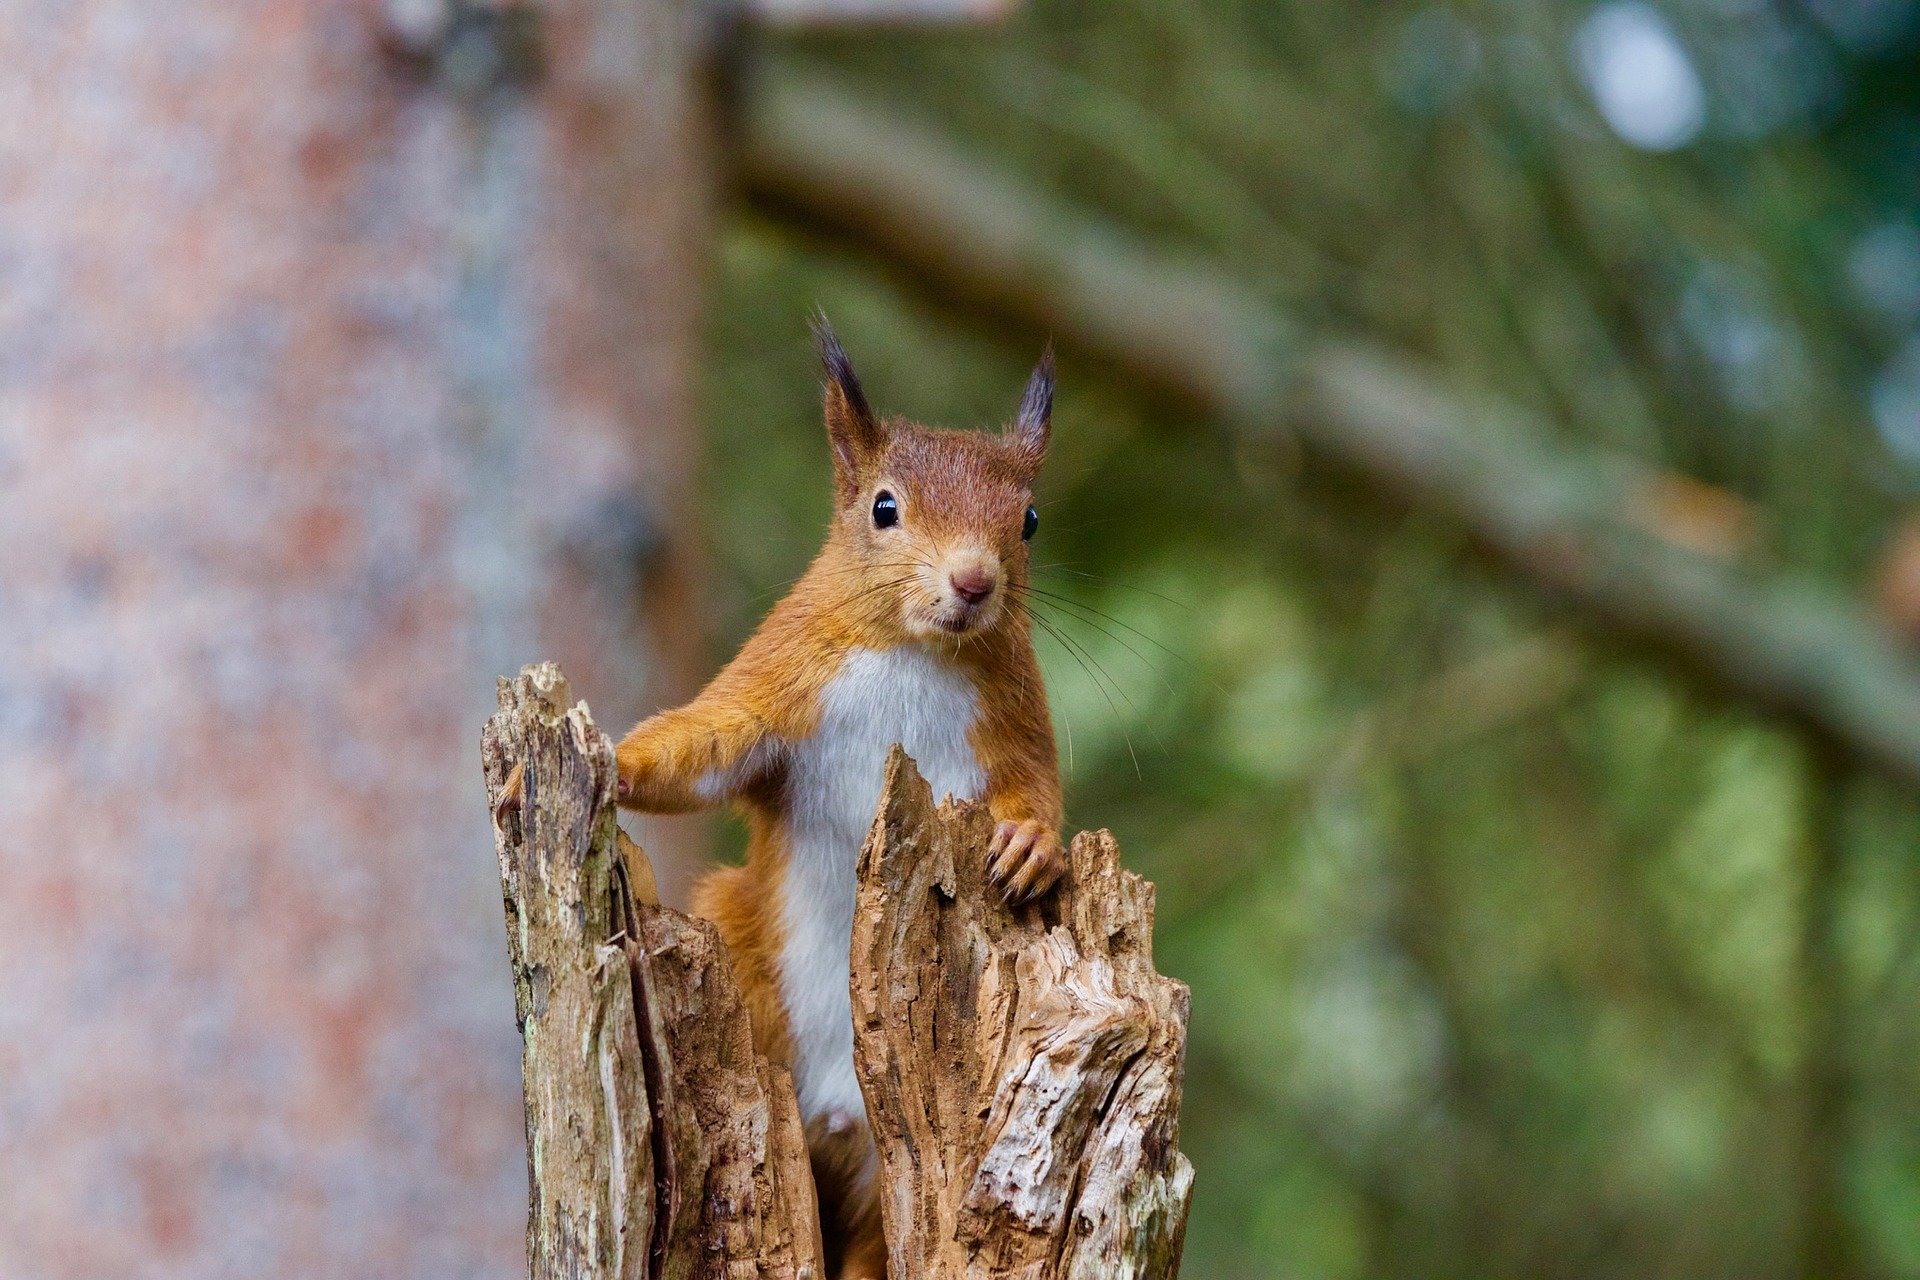 Image of a red squirrel sitting in a tree.